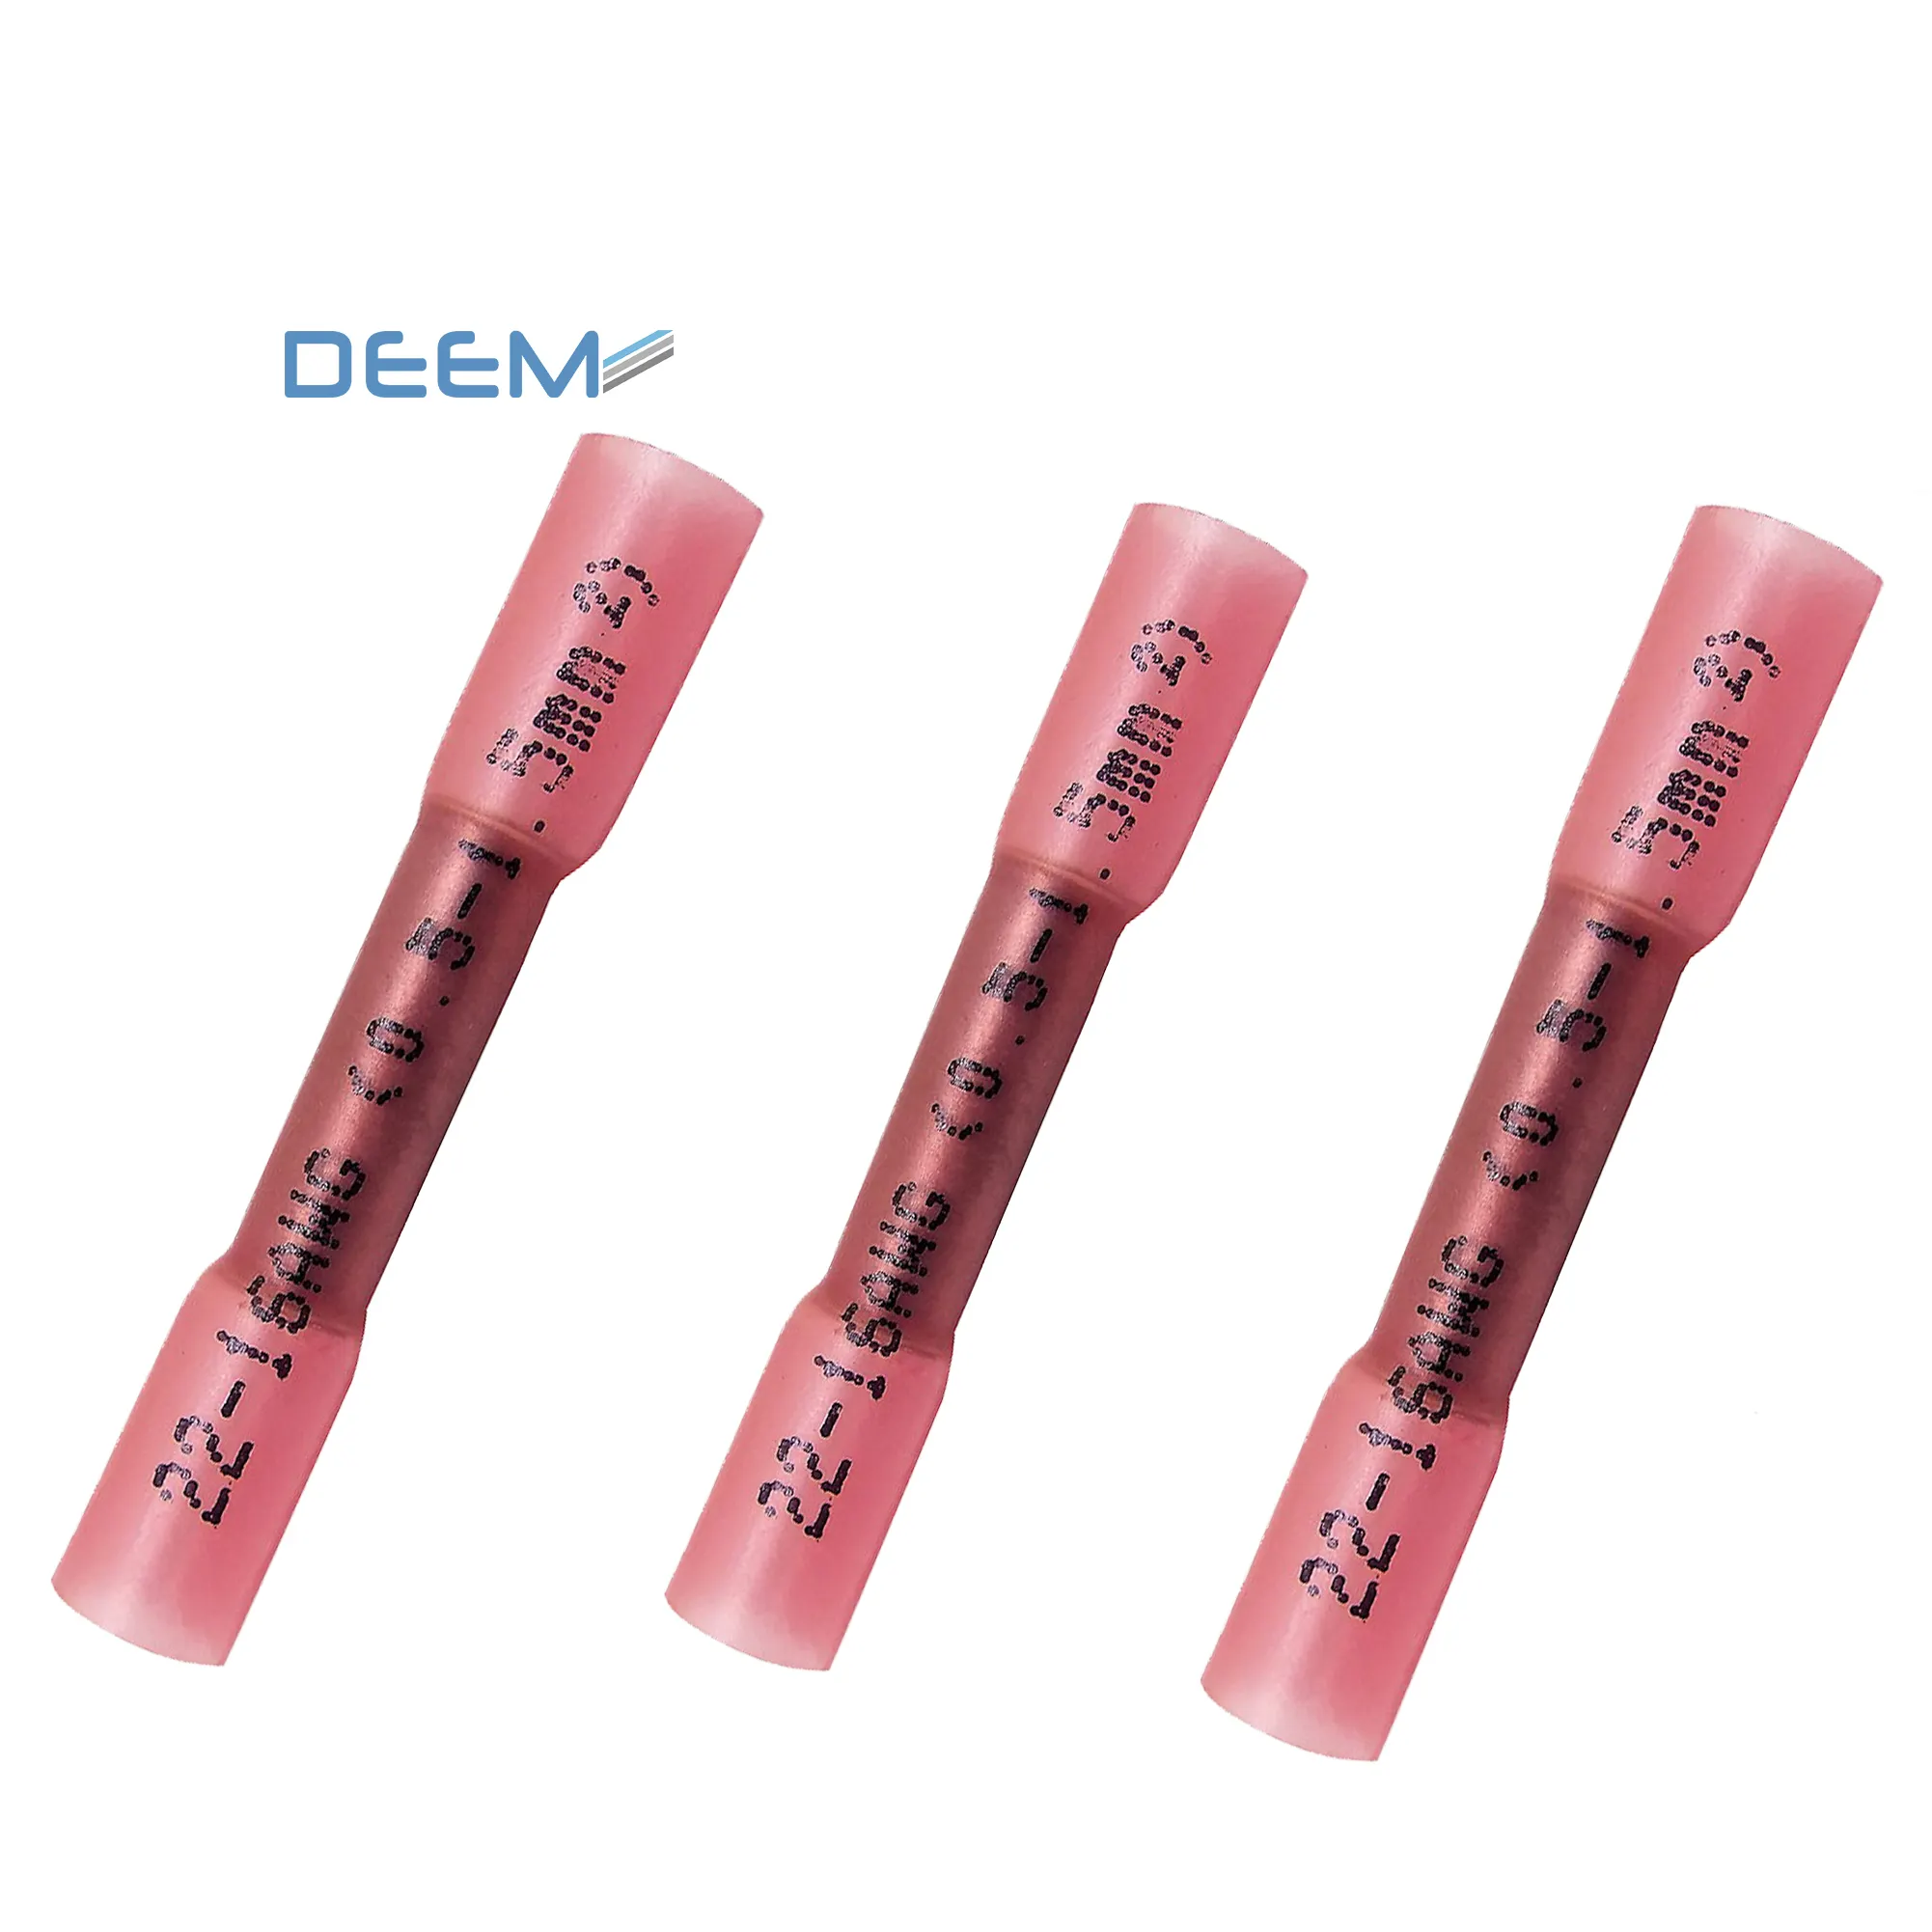 DEEM Heat Shrink Butt Connectors for Wire Terminals Splice Connectors Plastic Bag or 180pcs in Box or Customer Request Insulated